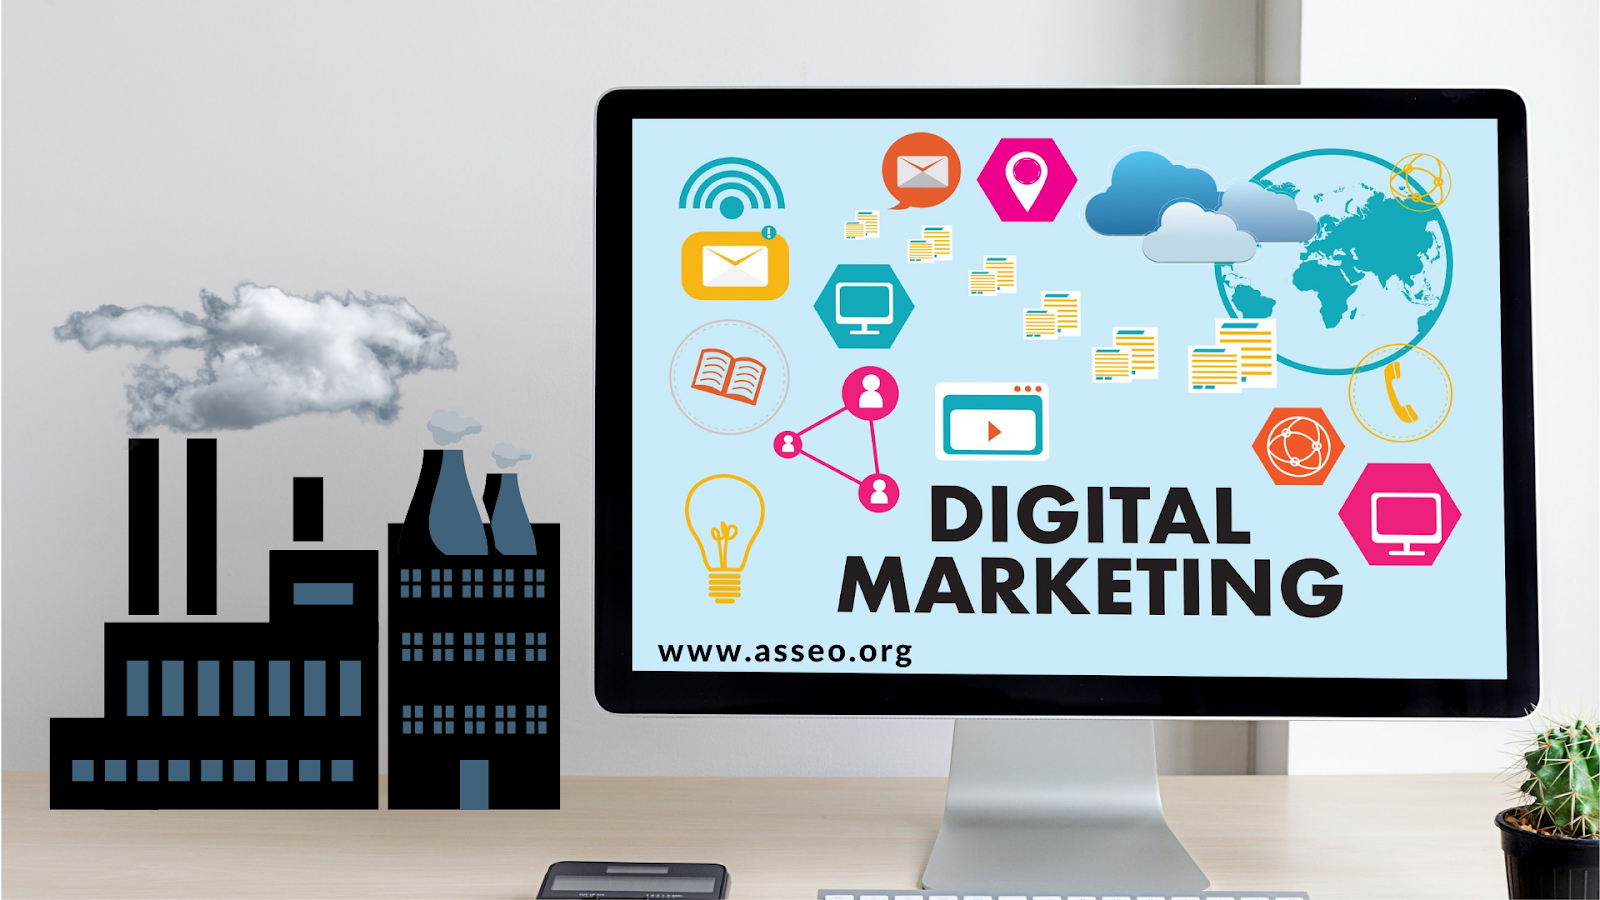 Marketing techniques in manufacturing industries have also made significant investments in marketing add-ons such as email marketing and marketing automation—the complete set of digital marketing techniques.